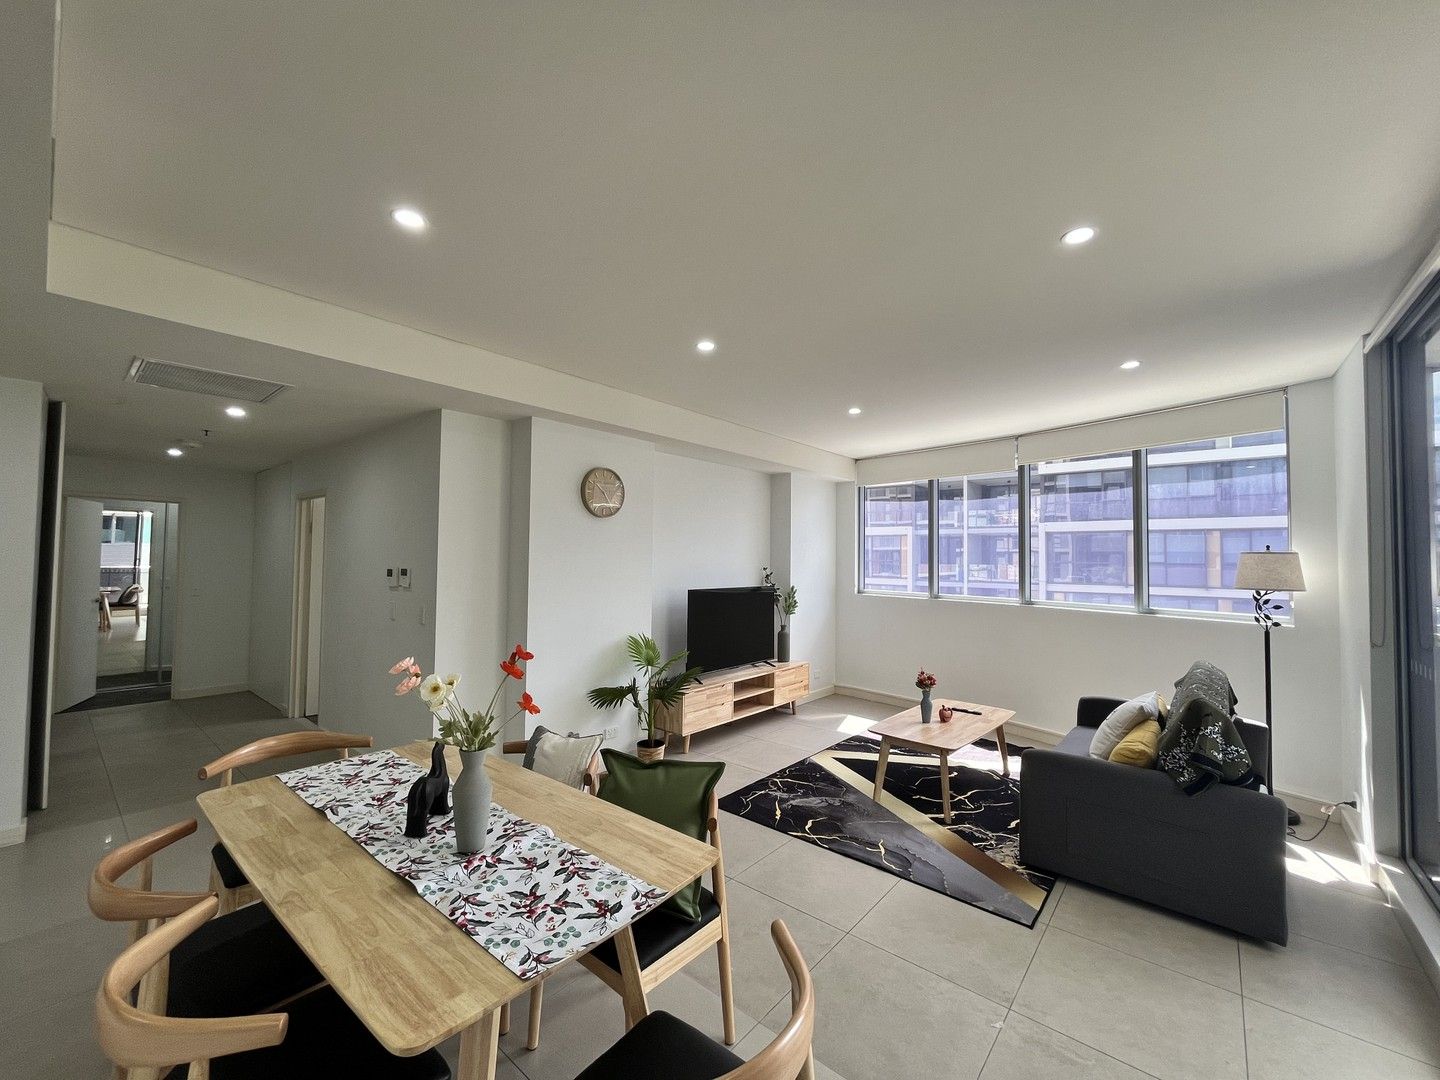 3 bedrooms Apartment / Unit / Flat in Level 4, 413/260 Coward Street MASCOT NSW, 2020